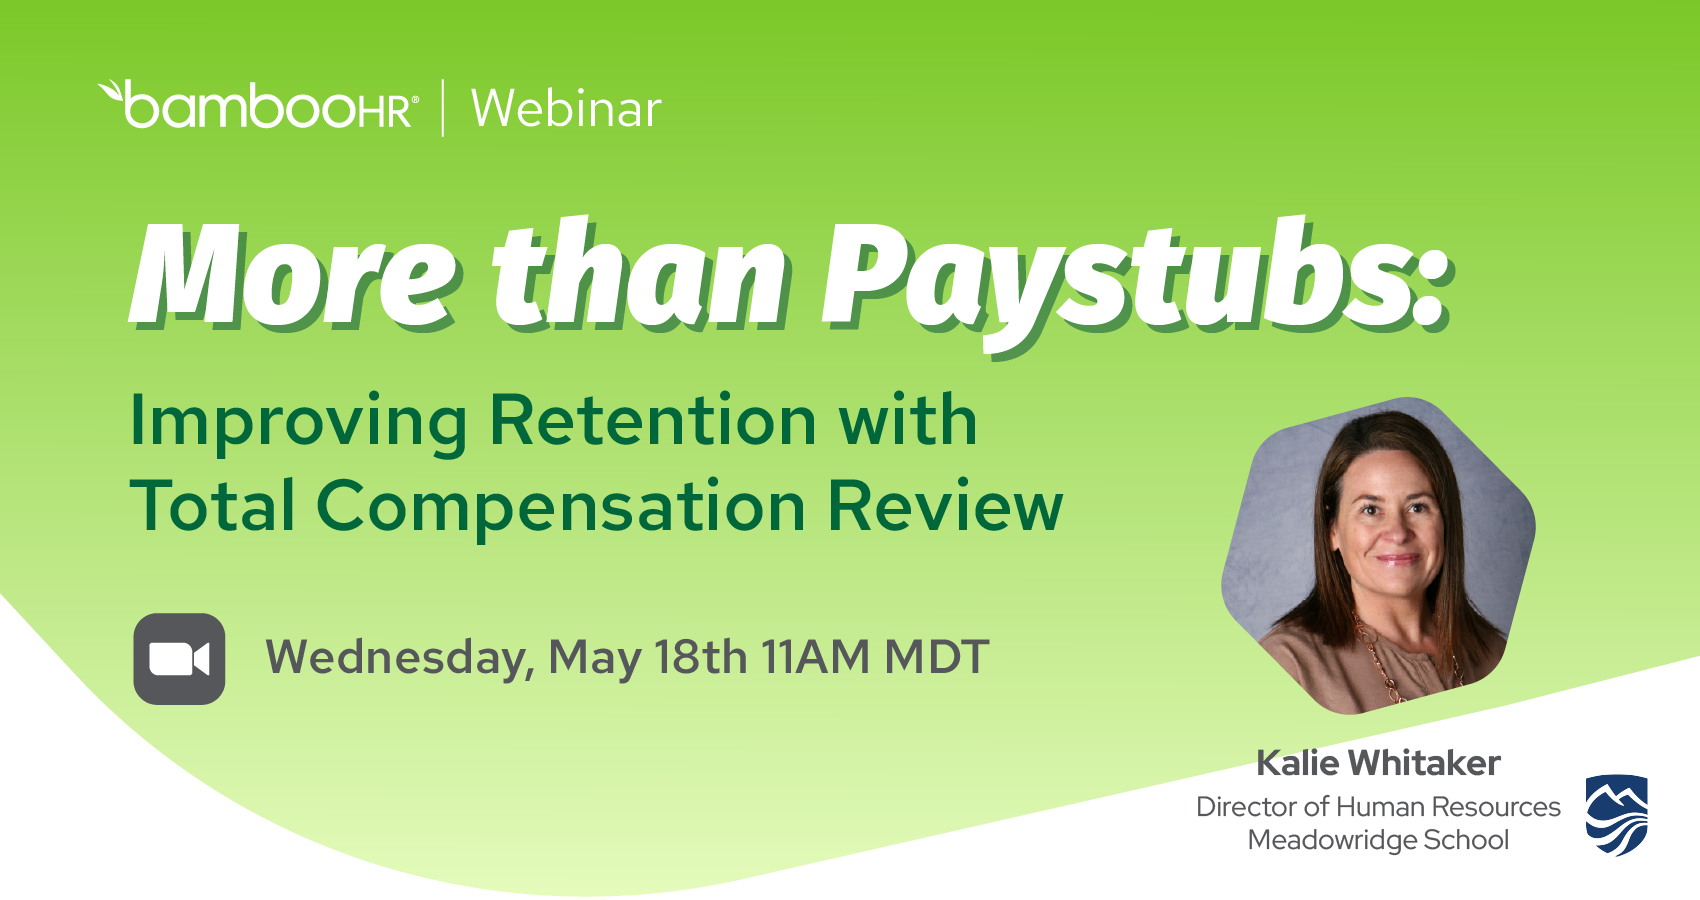 More than Pay Stubs: Improving Retention with Total Compensation Review